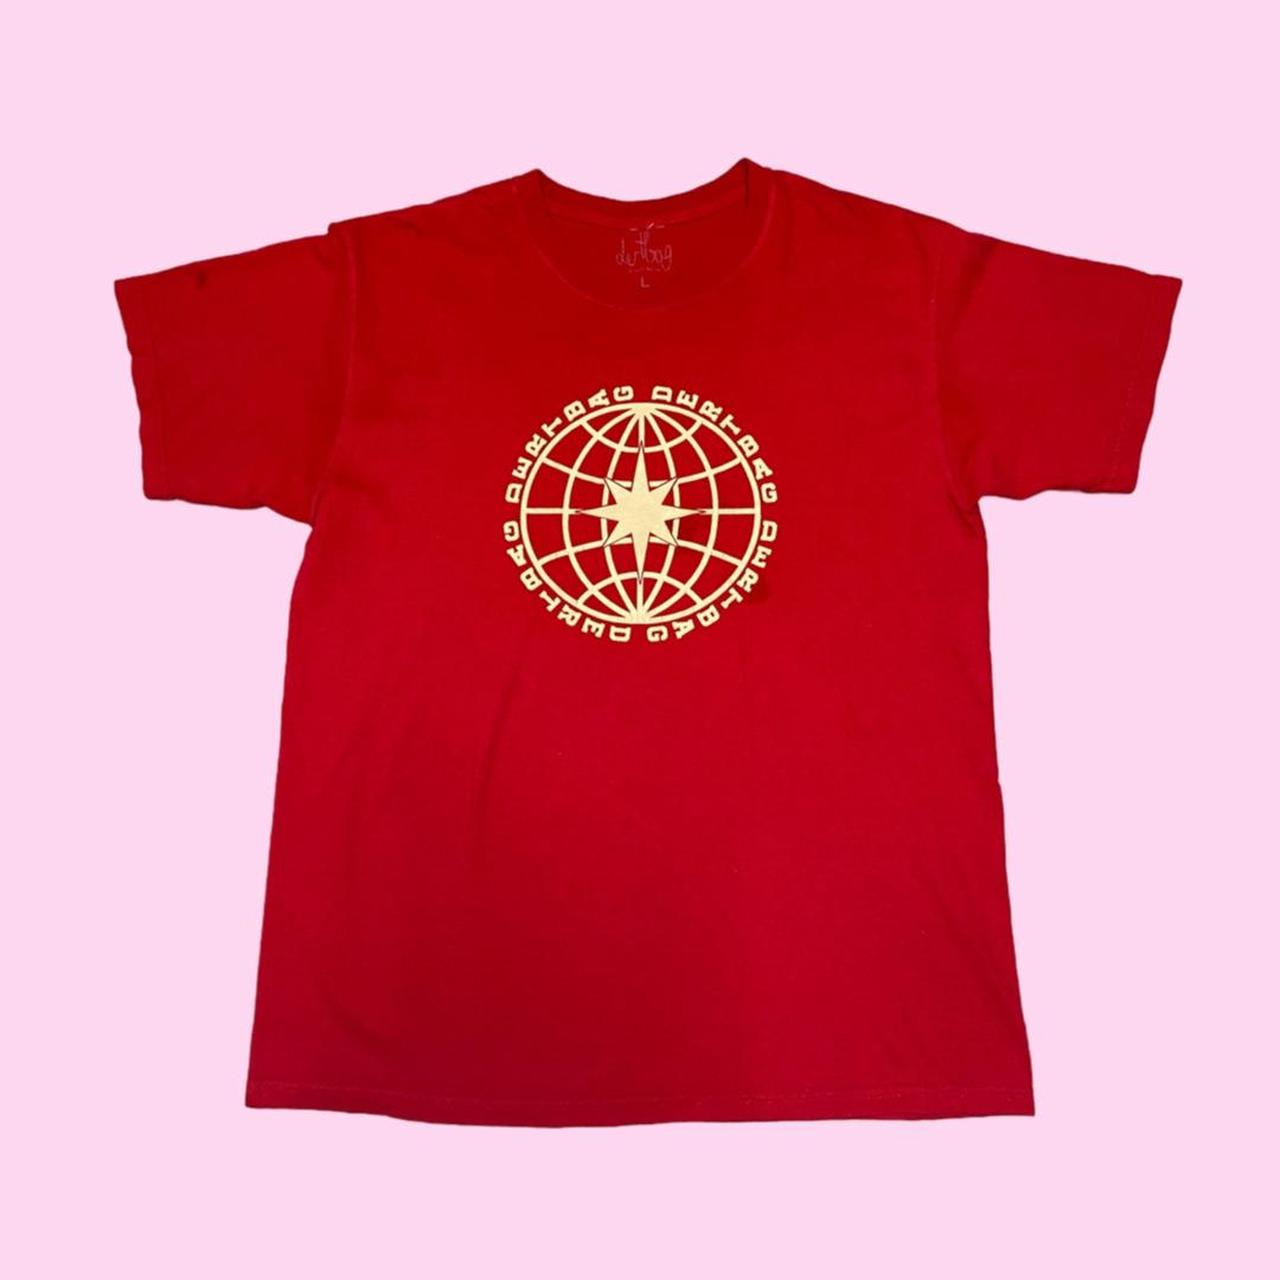 Product Image 2 - dertbag red tee - mens